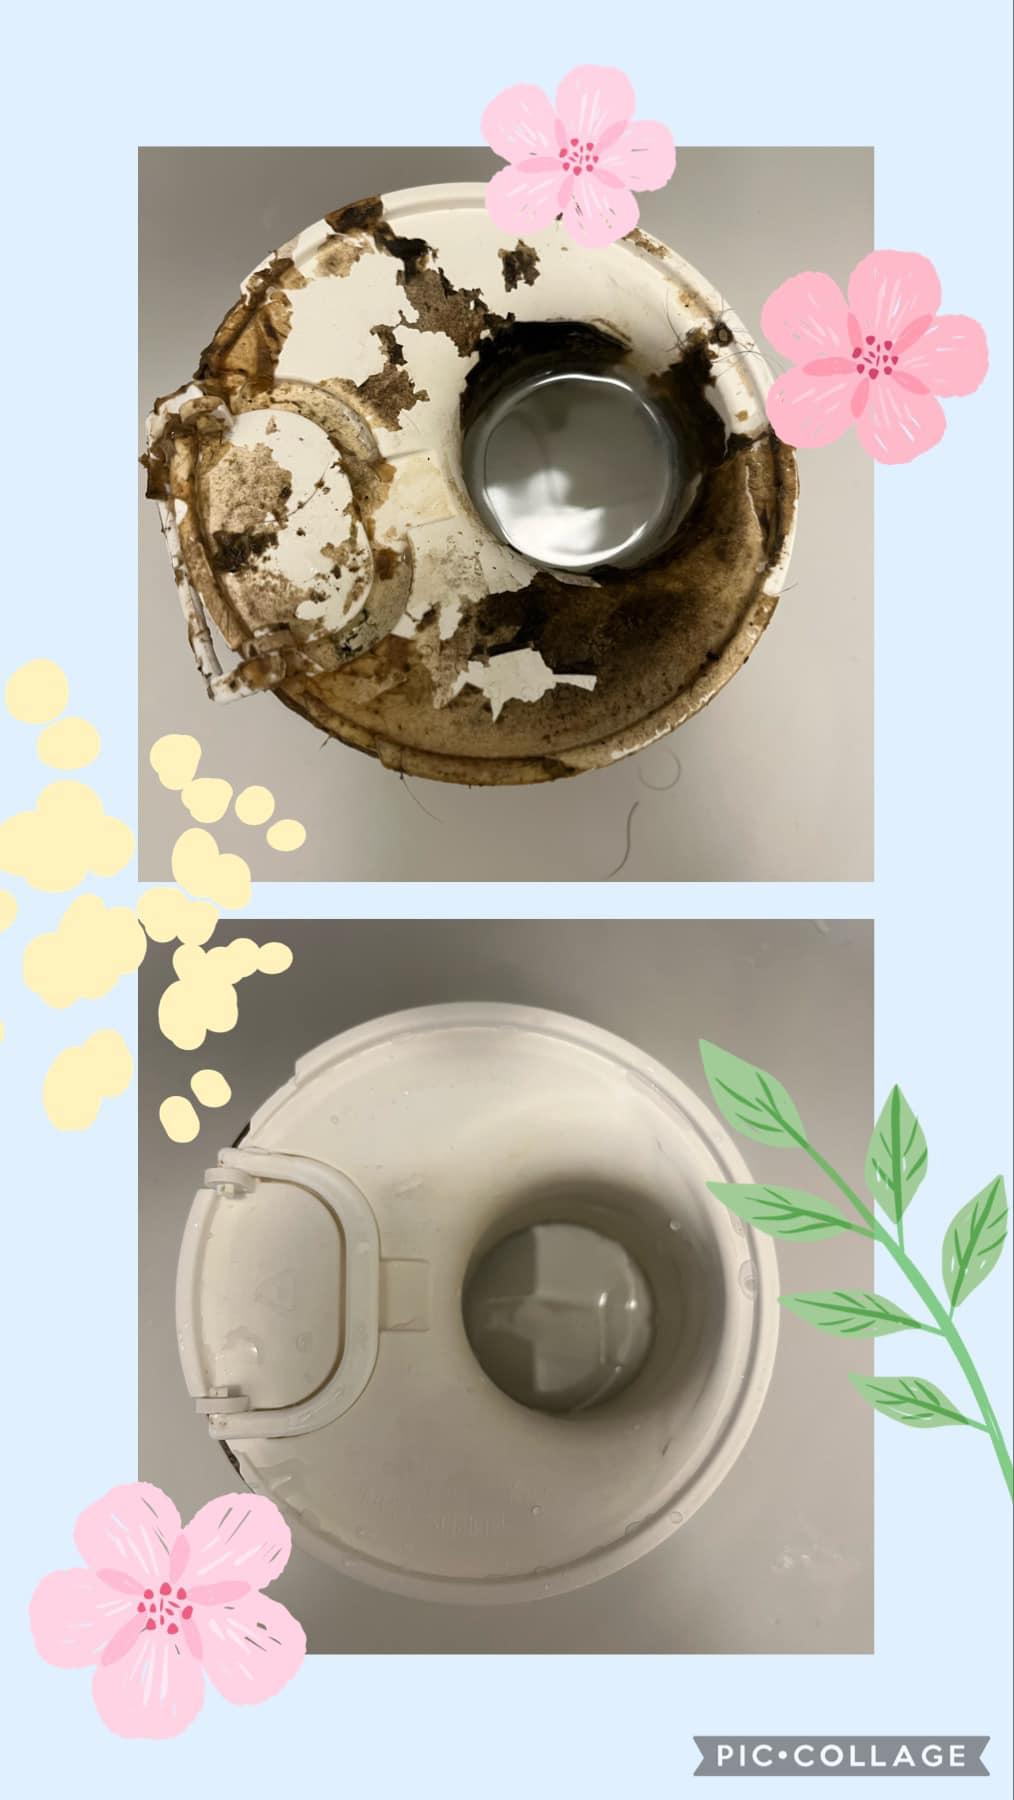 Before and after cleaning the dirty bathroom drain.